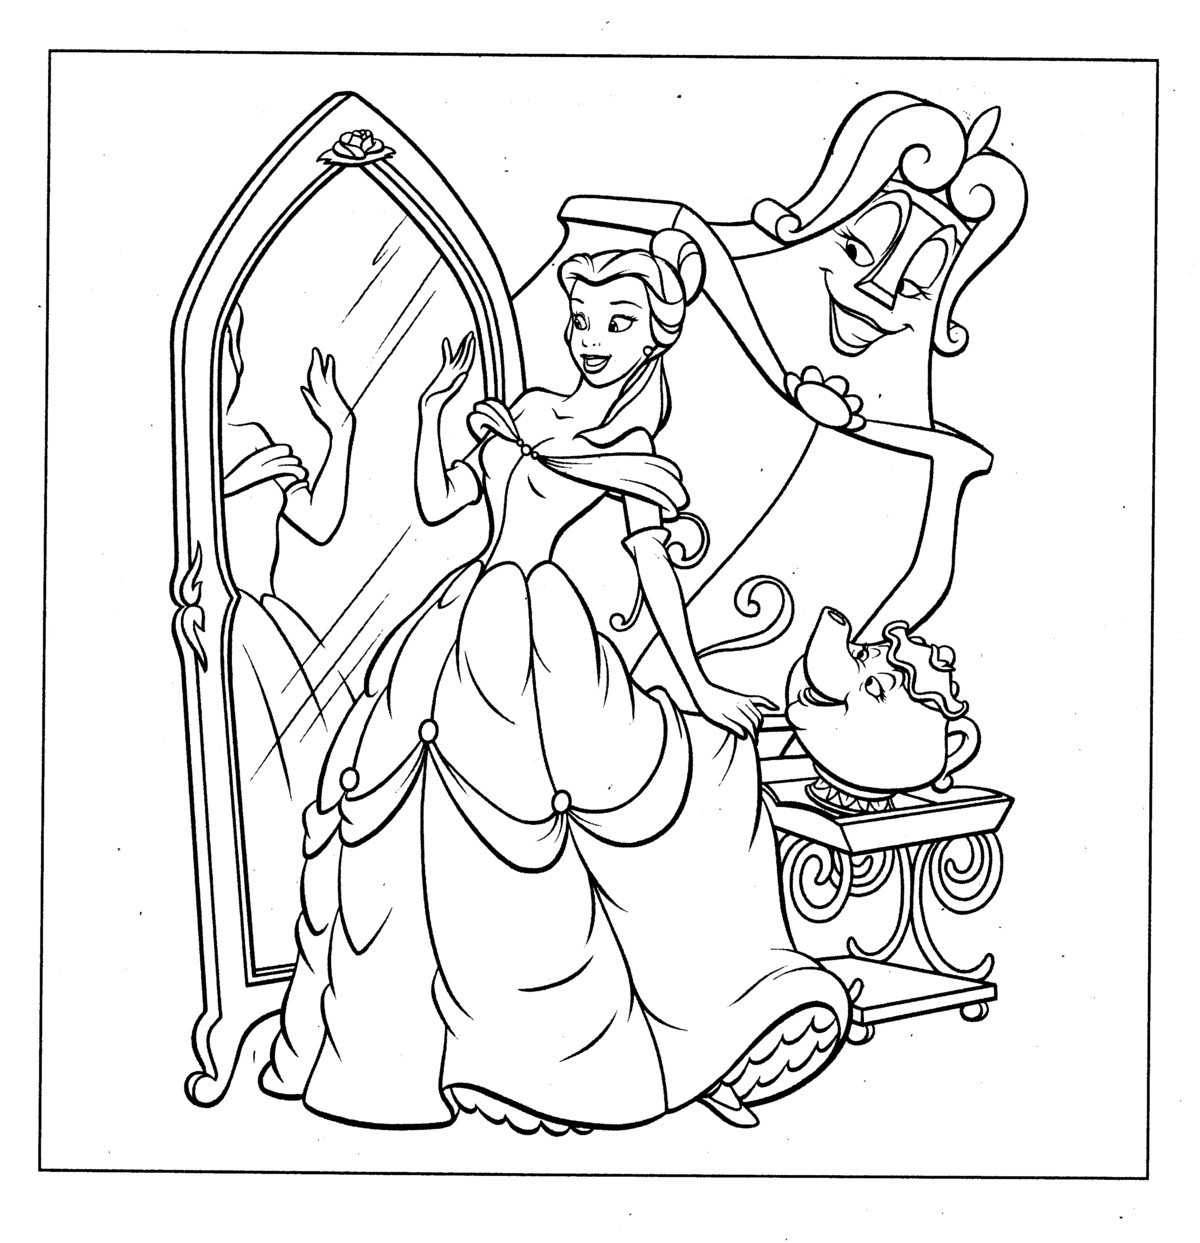 Coloring Pages For Kids Princesses
 Disney Princess Belle Coloring Pages To Kids